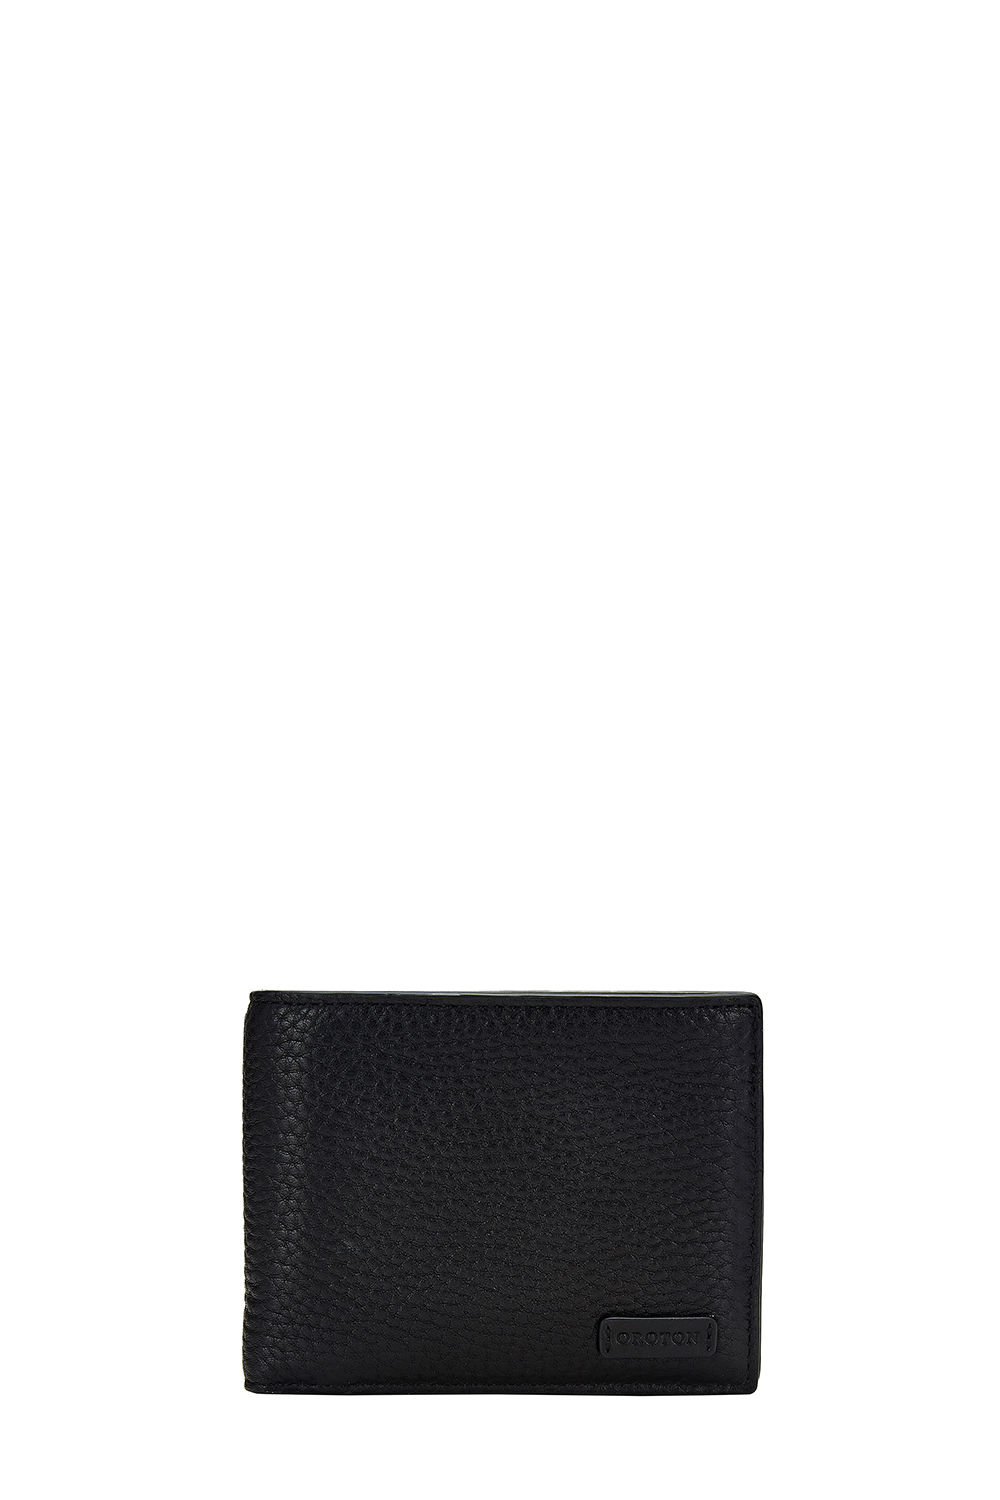 Men's Leather Wallets, Card Holders & Money Clips | Oroton Shop